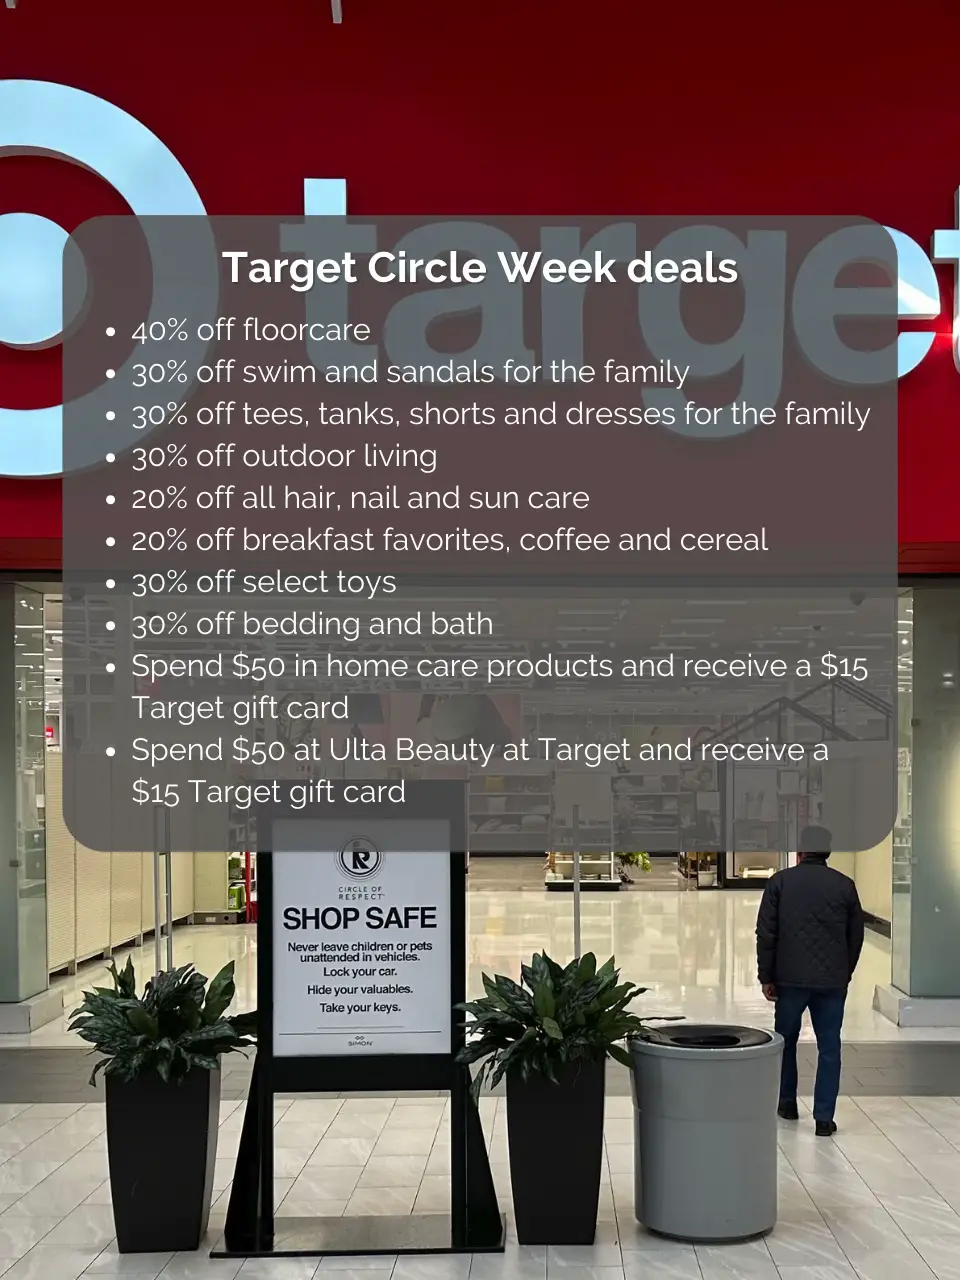 ❤️⭐️ TARGET SPEND $50, get $15 GIFTCARD ⭐️❤️ final - FREE